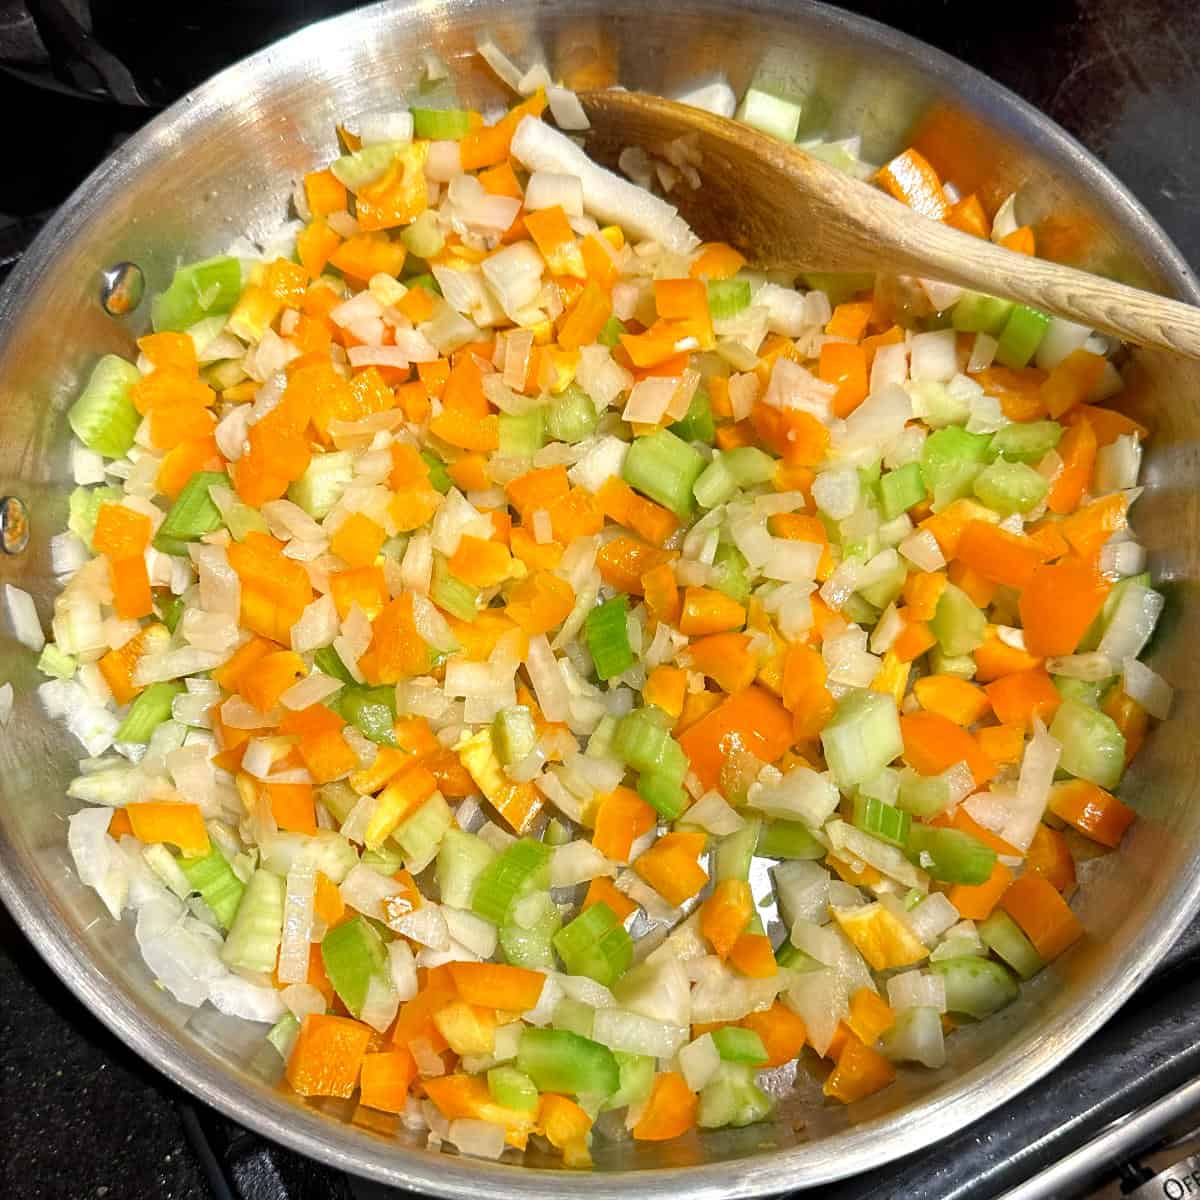 Carrots and bell peppers added to skillet.